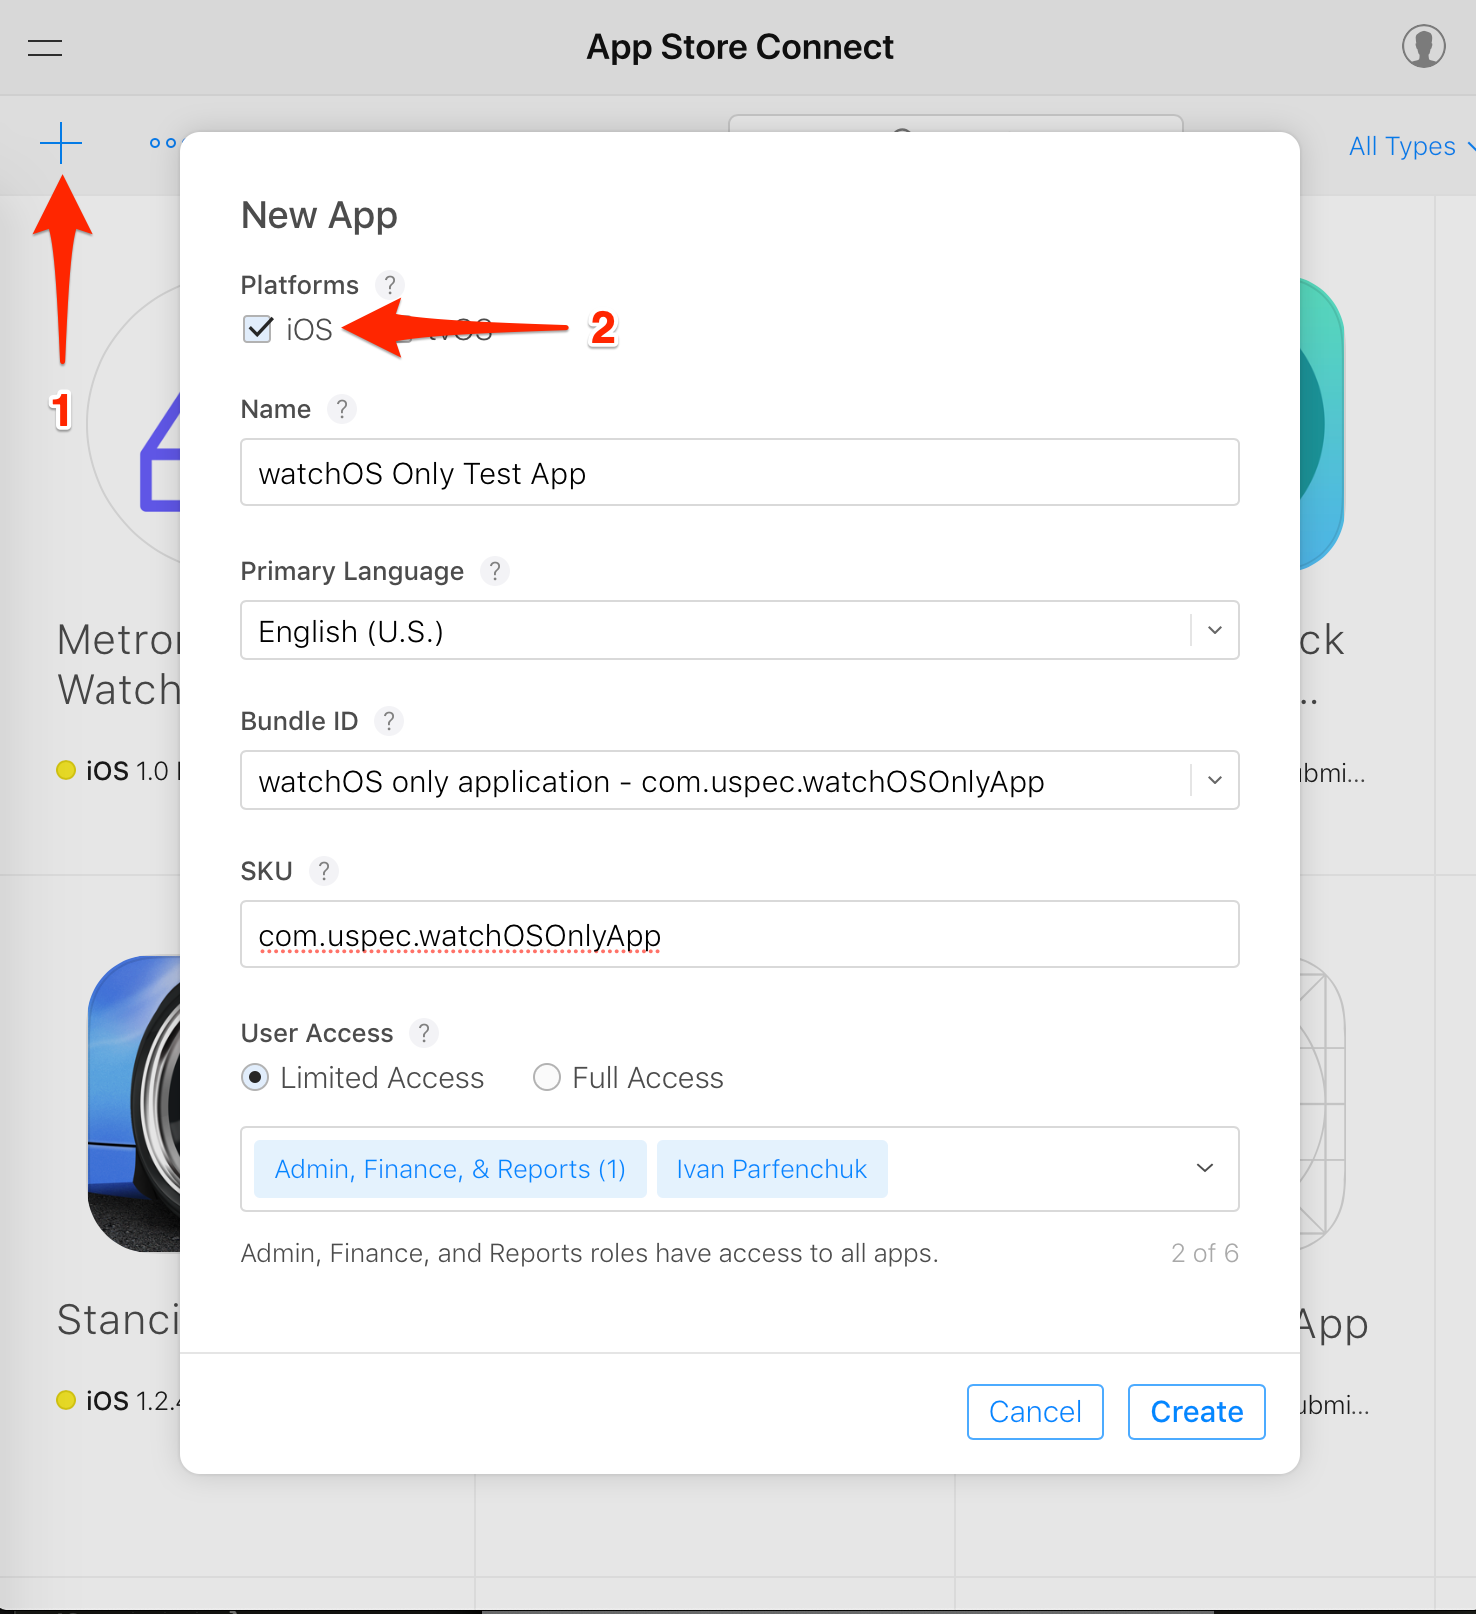 Creating new App in App Store Connect